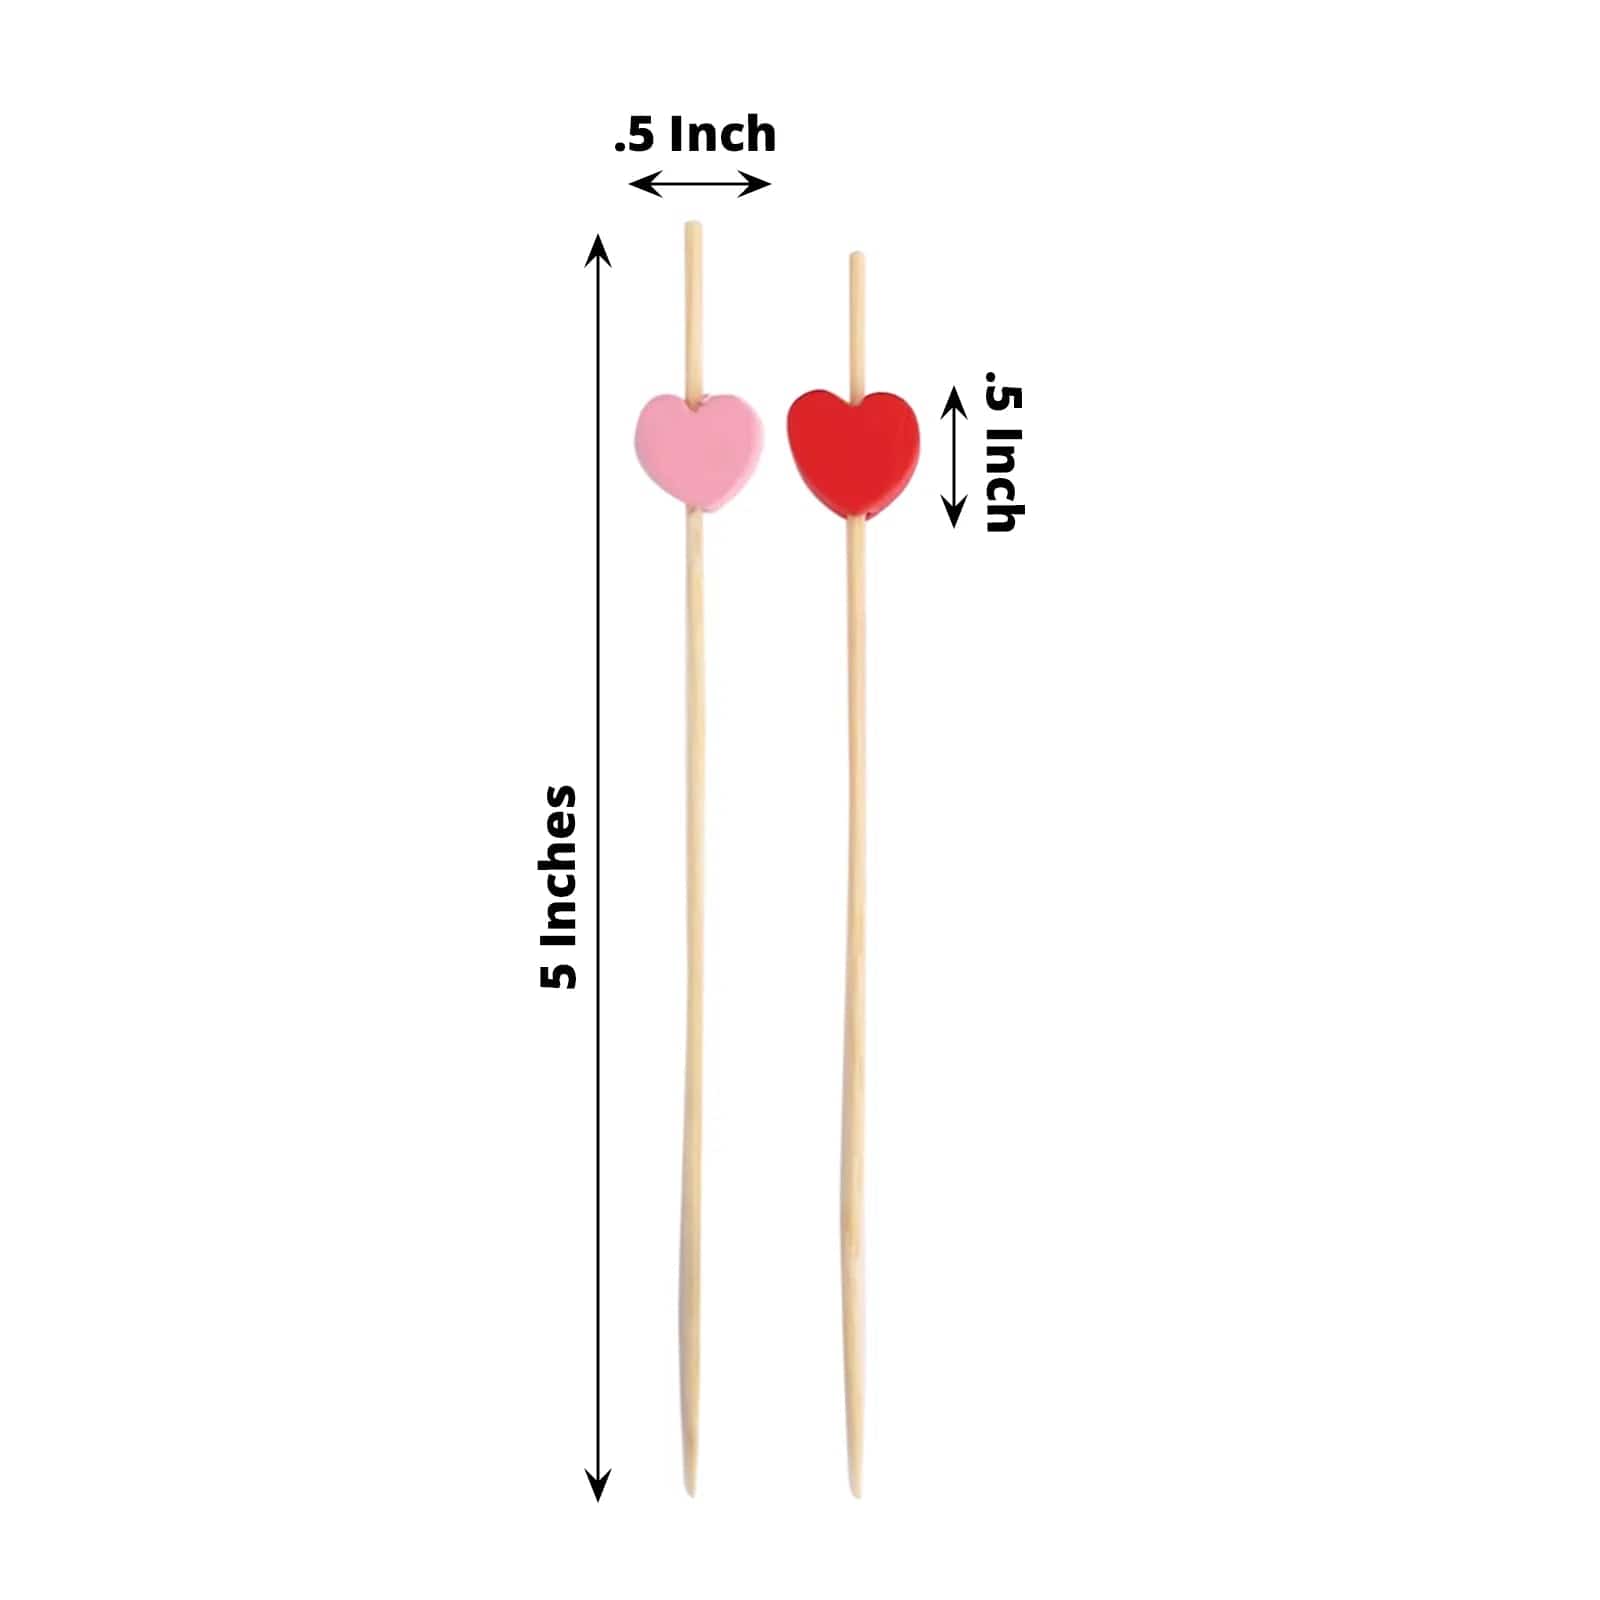 100 Natural Bamboo Skewers Red and Pink Heart Top Sustainable Cocktail Picks